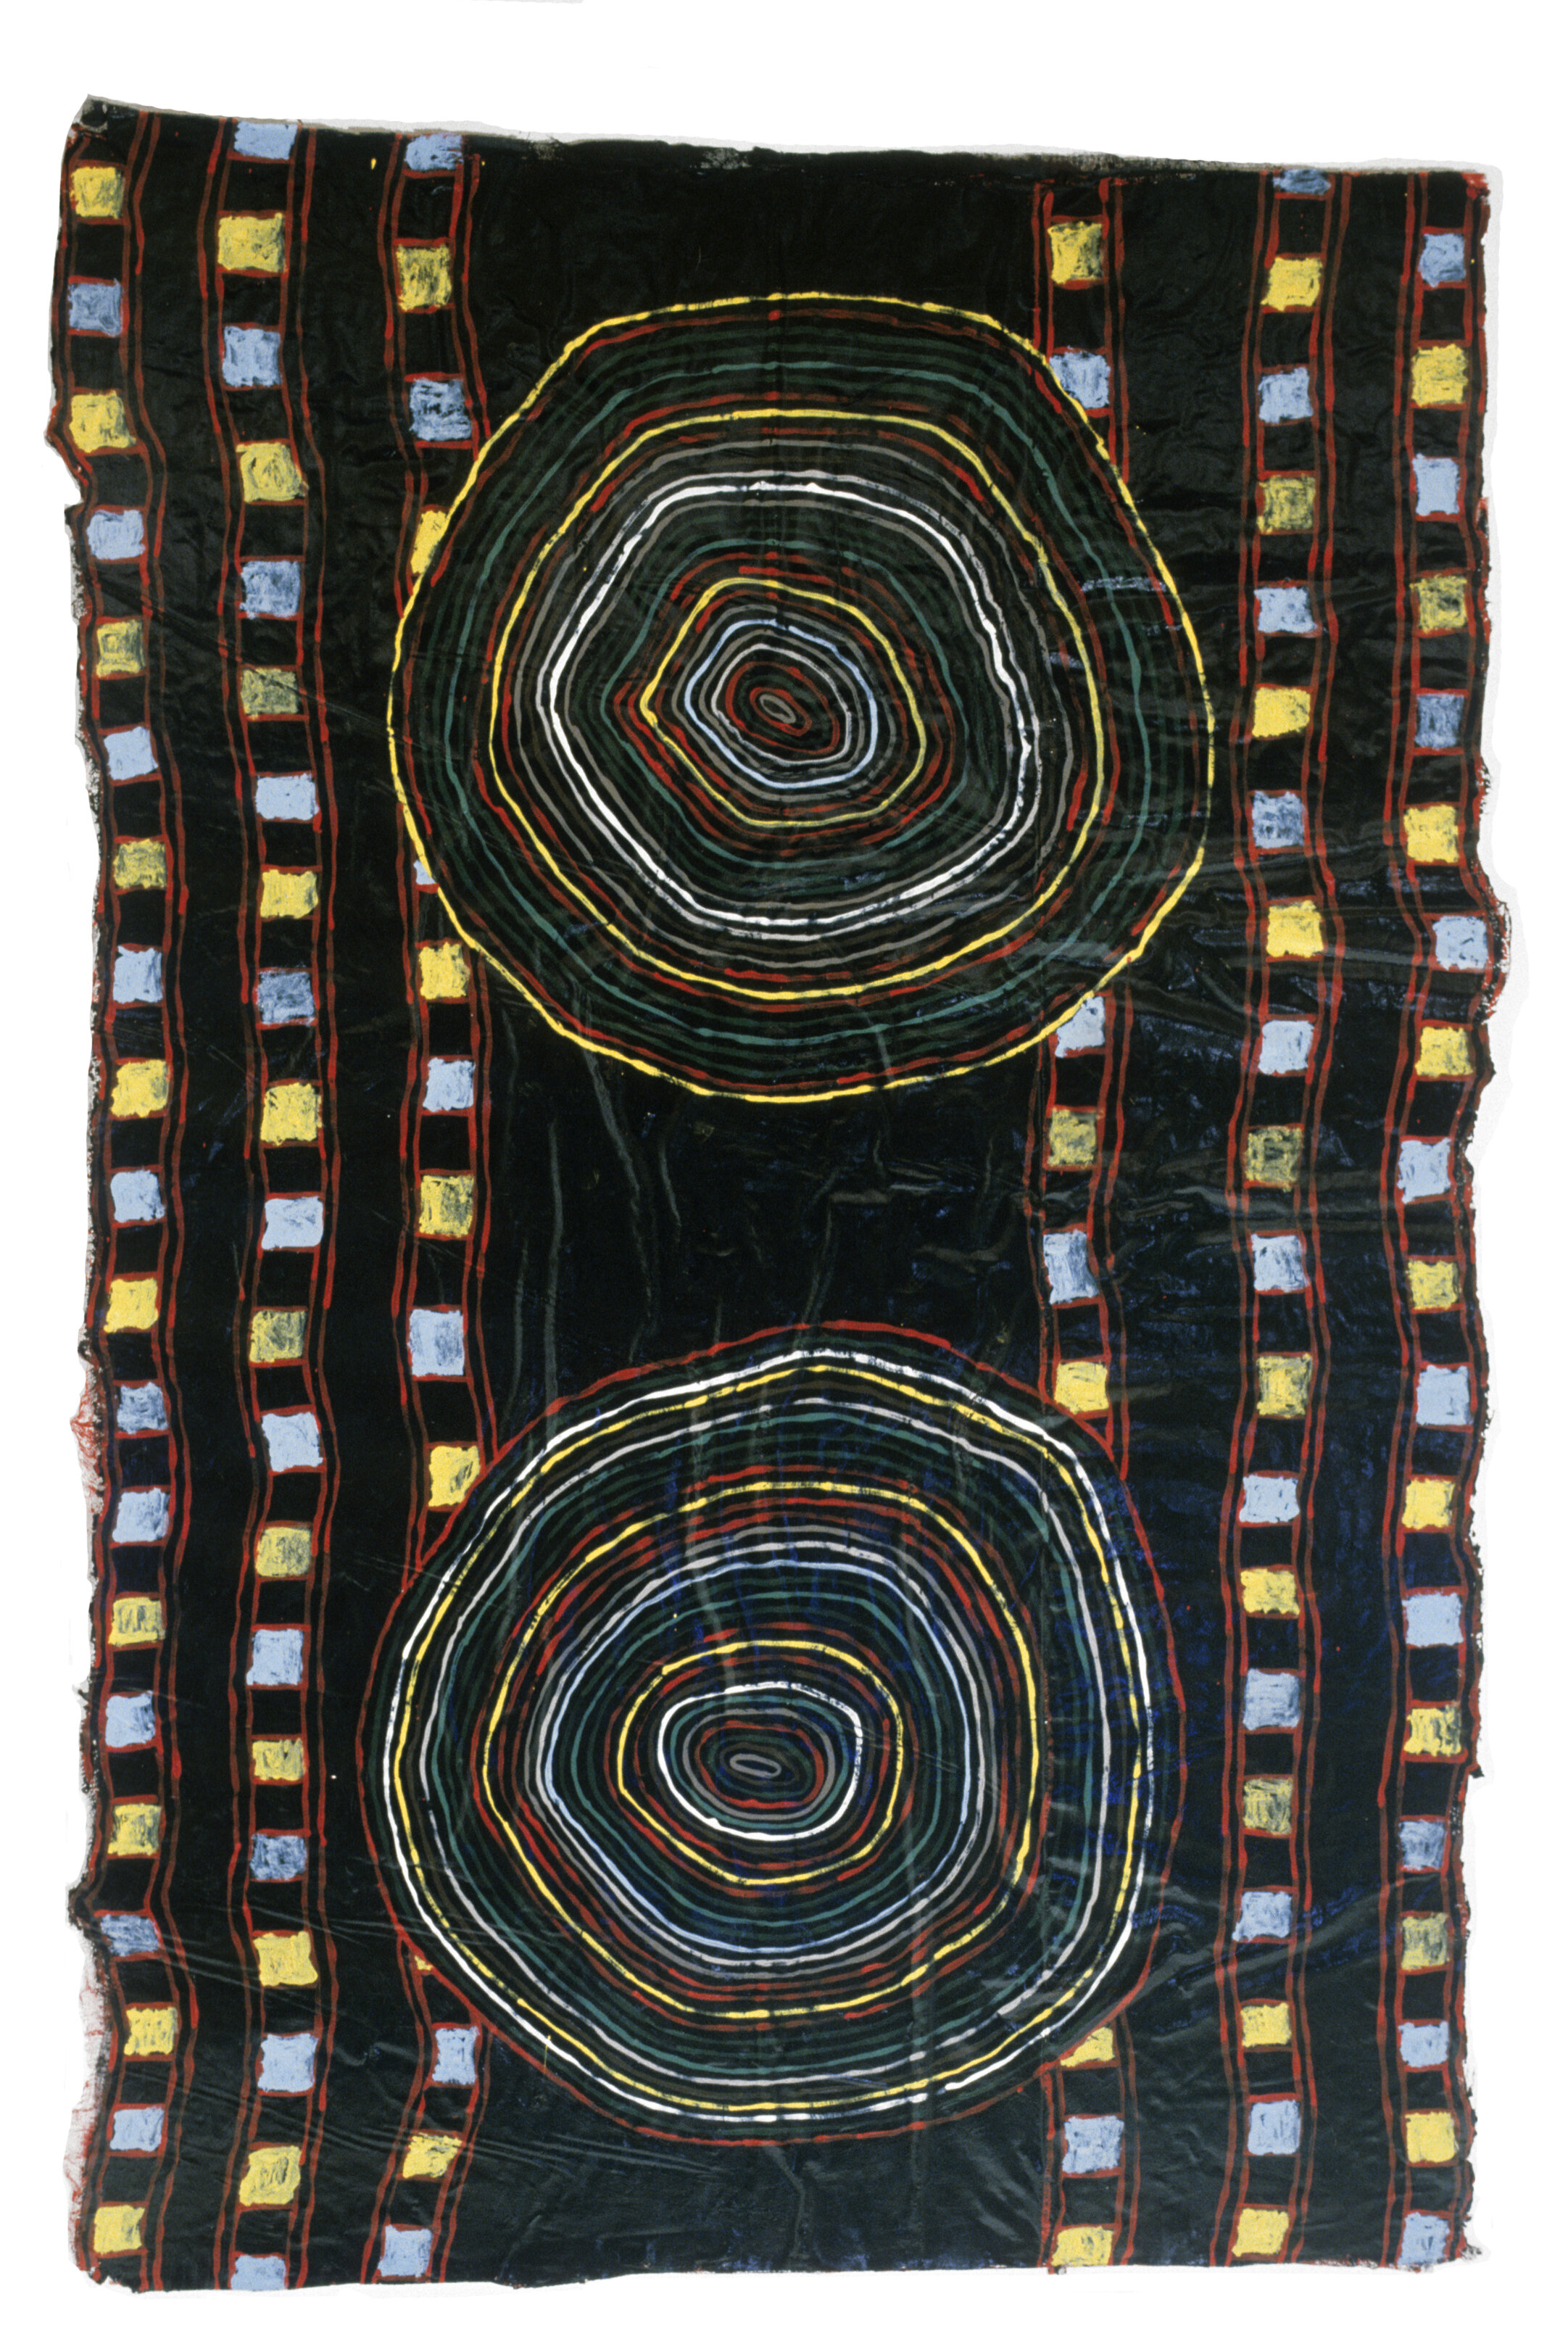   Medallions , 1982, cheesecloth, latex enamel, 82 x 56 inches   